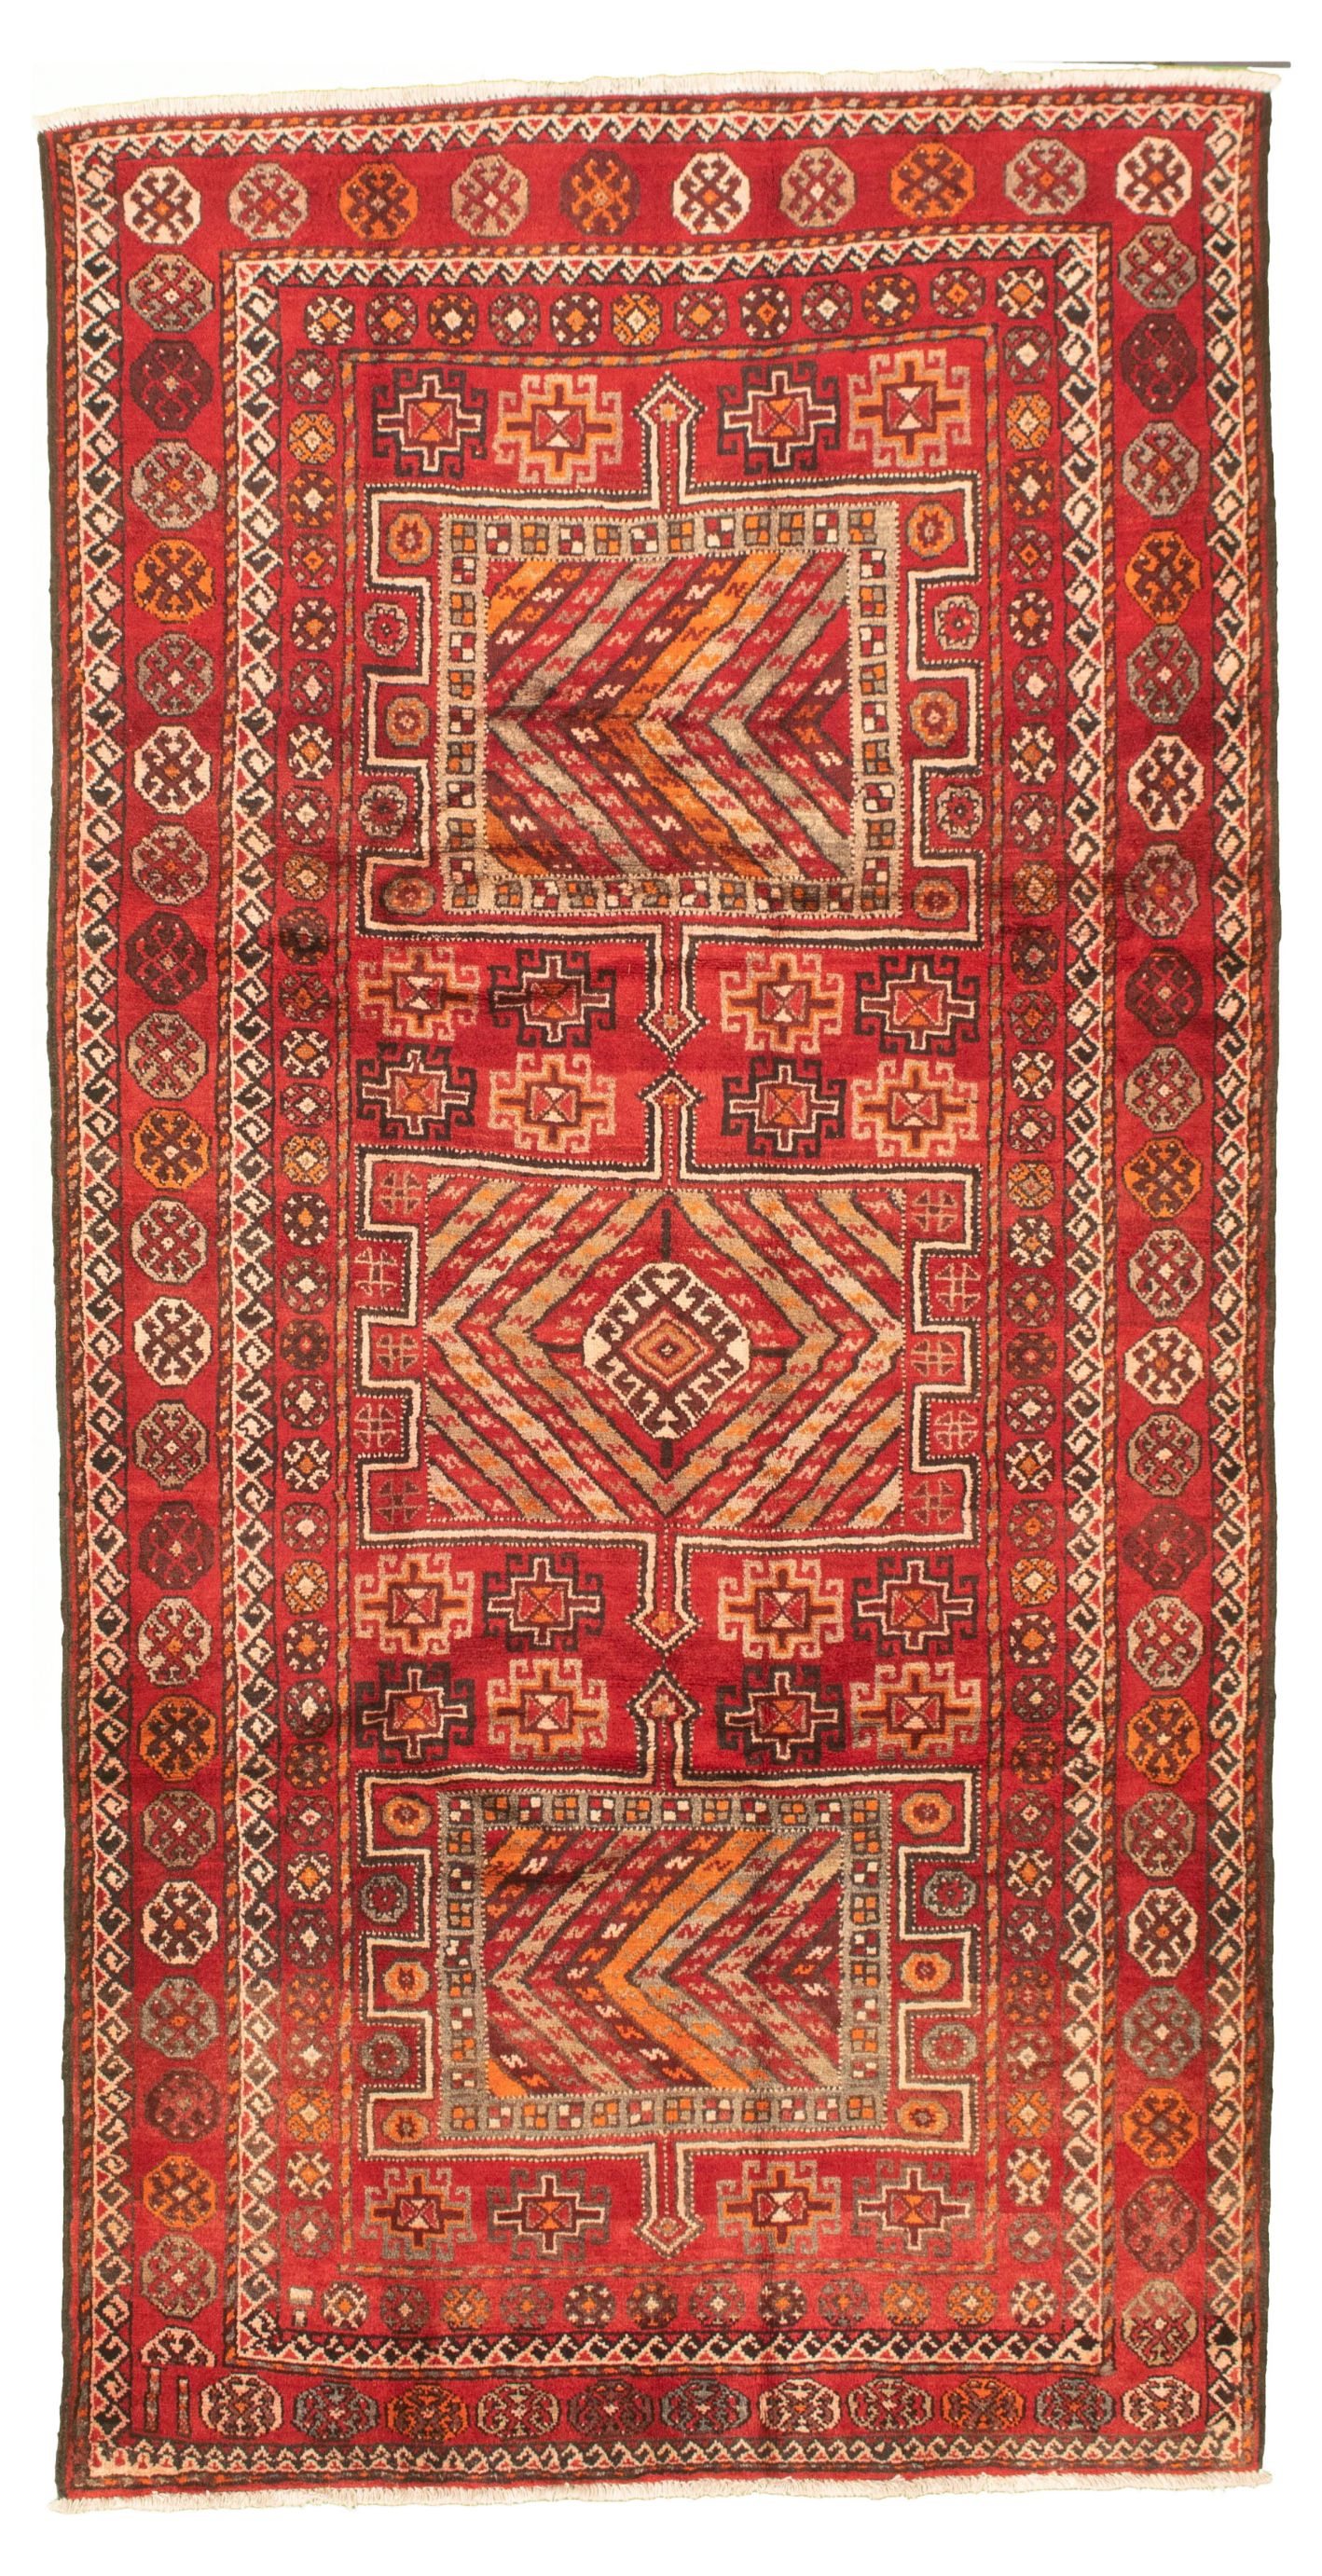 Hand-knotted Authentic Turkish Red Wool Rug 4'9" x 9'6"  Size: 4'9" x 9'6"  